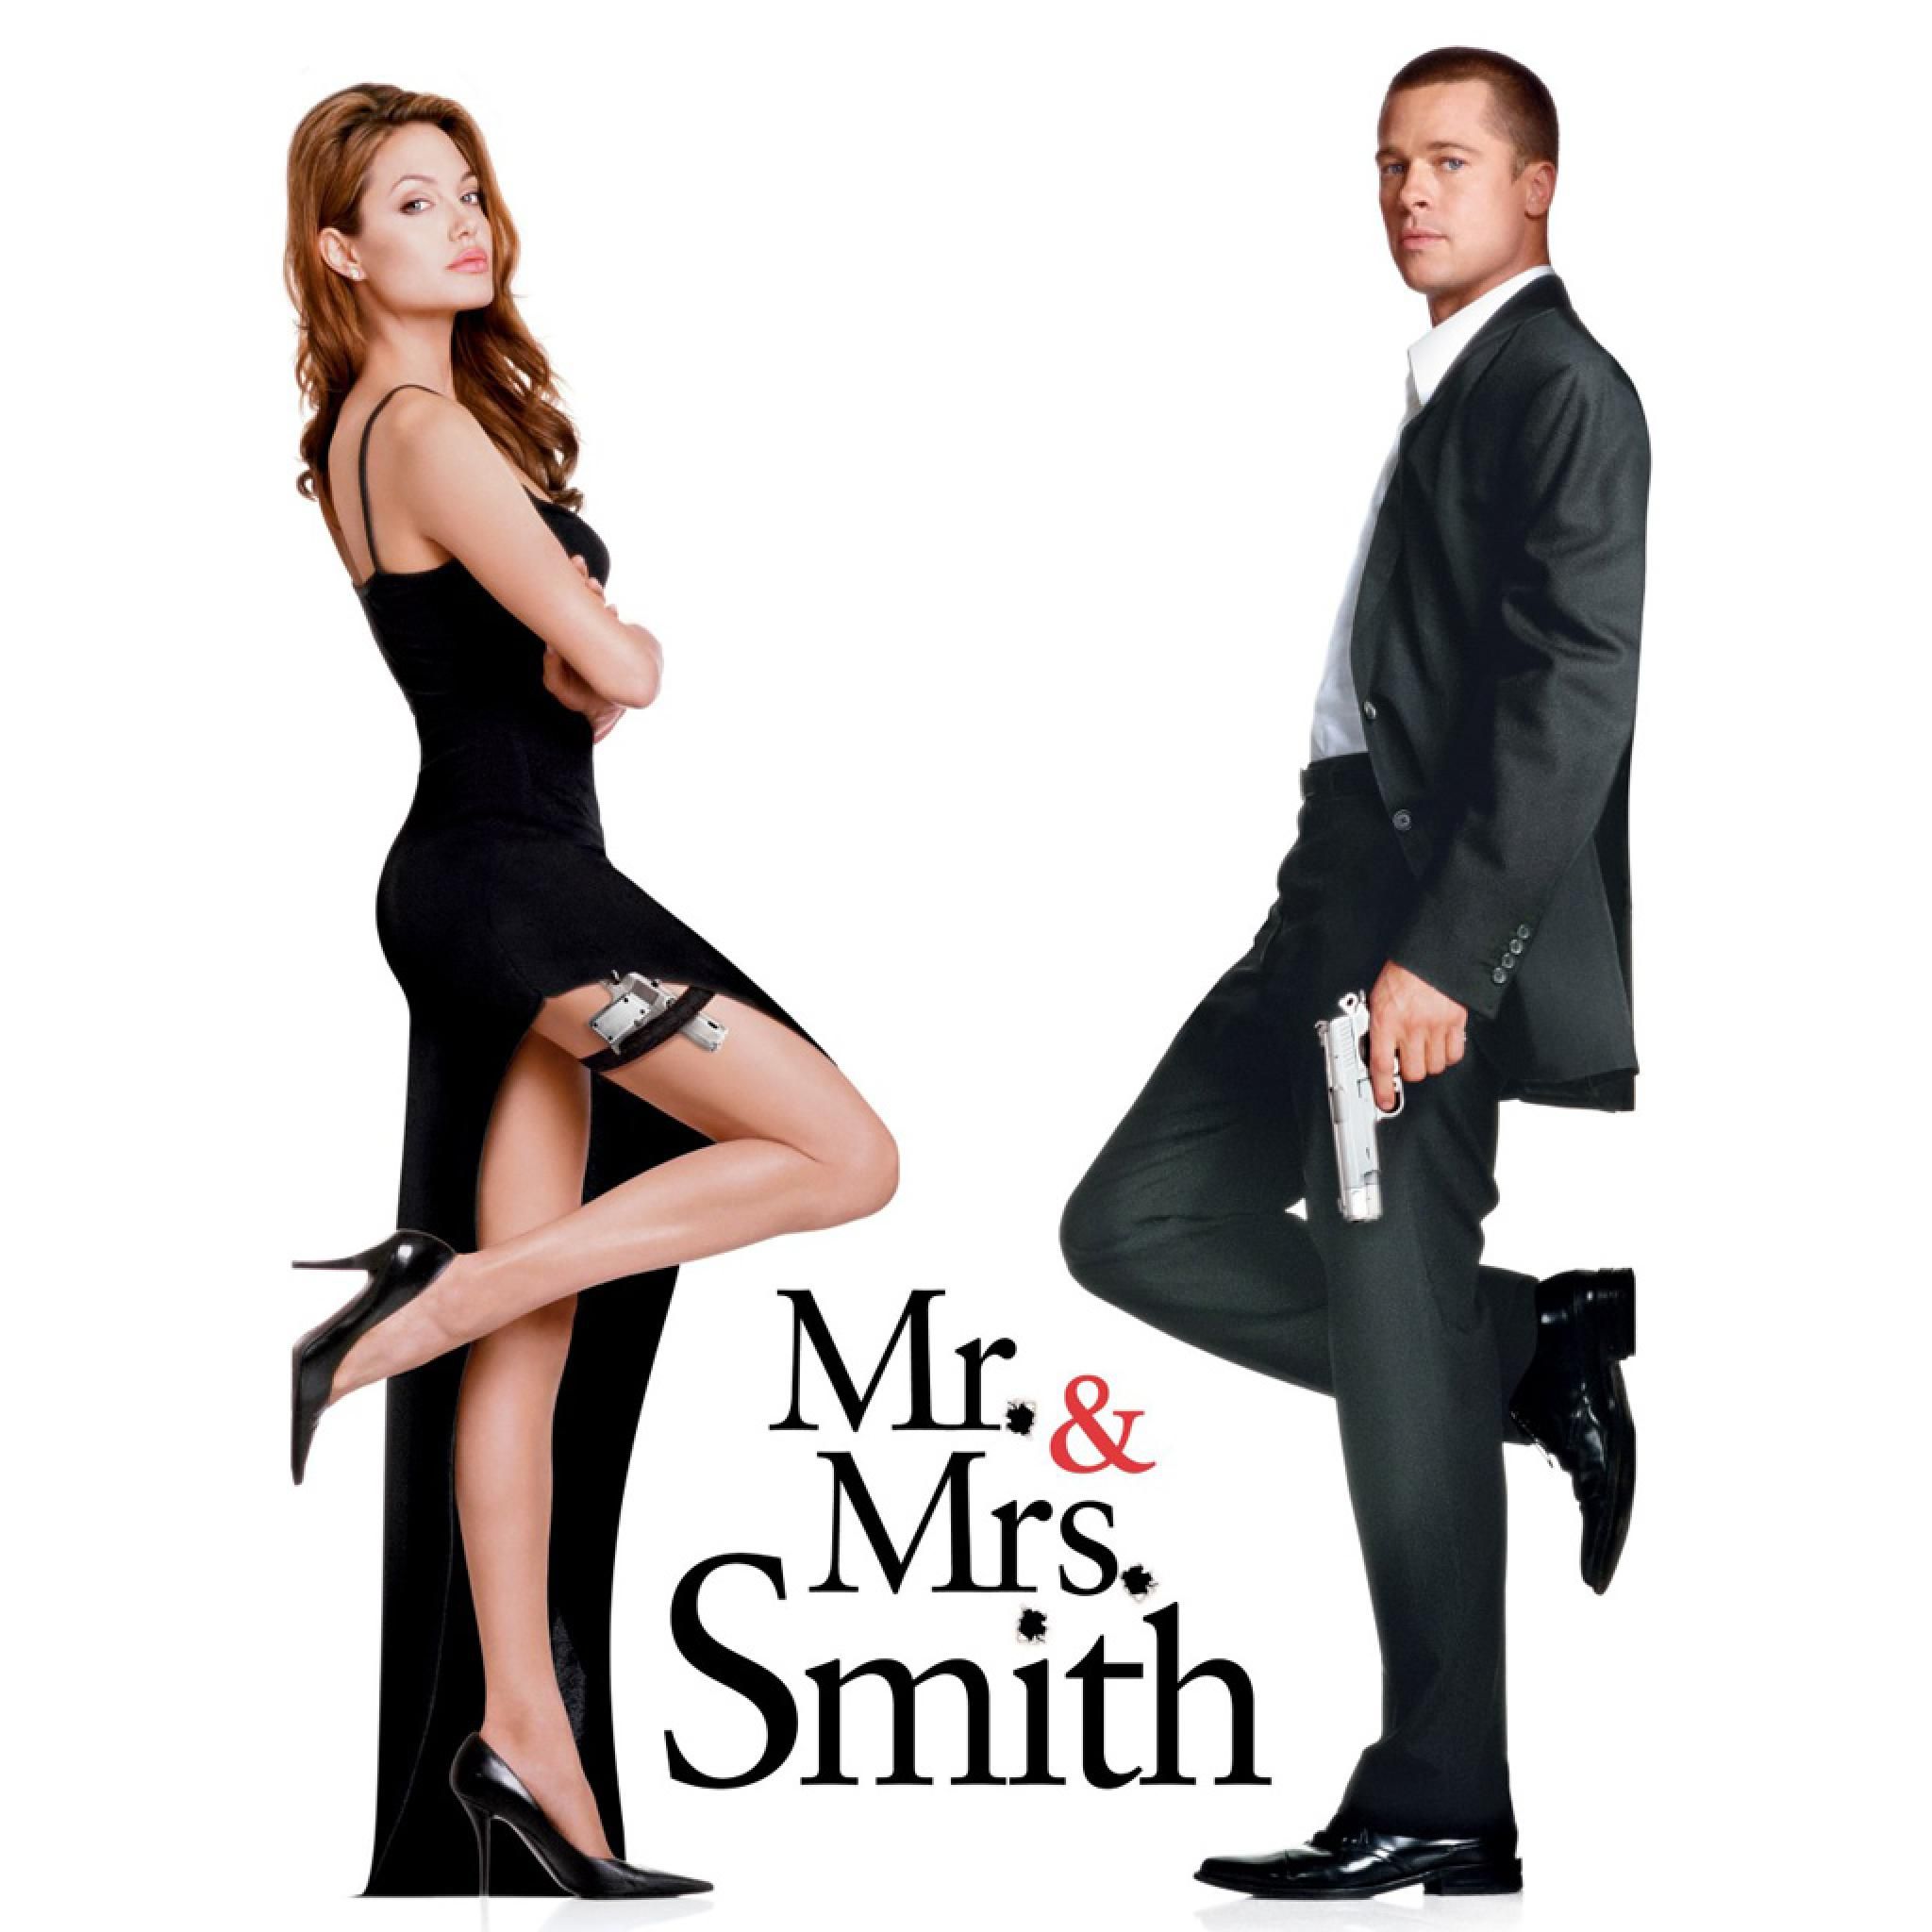 Movies TV. And Mrs. Smith IPhone HD Wallpaper Free